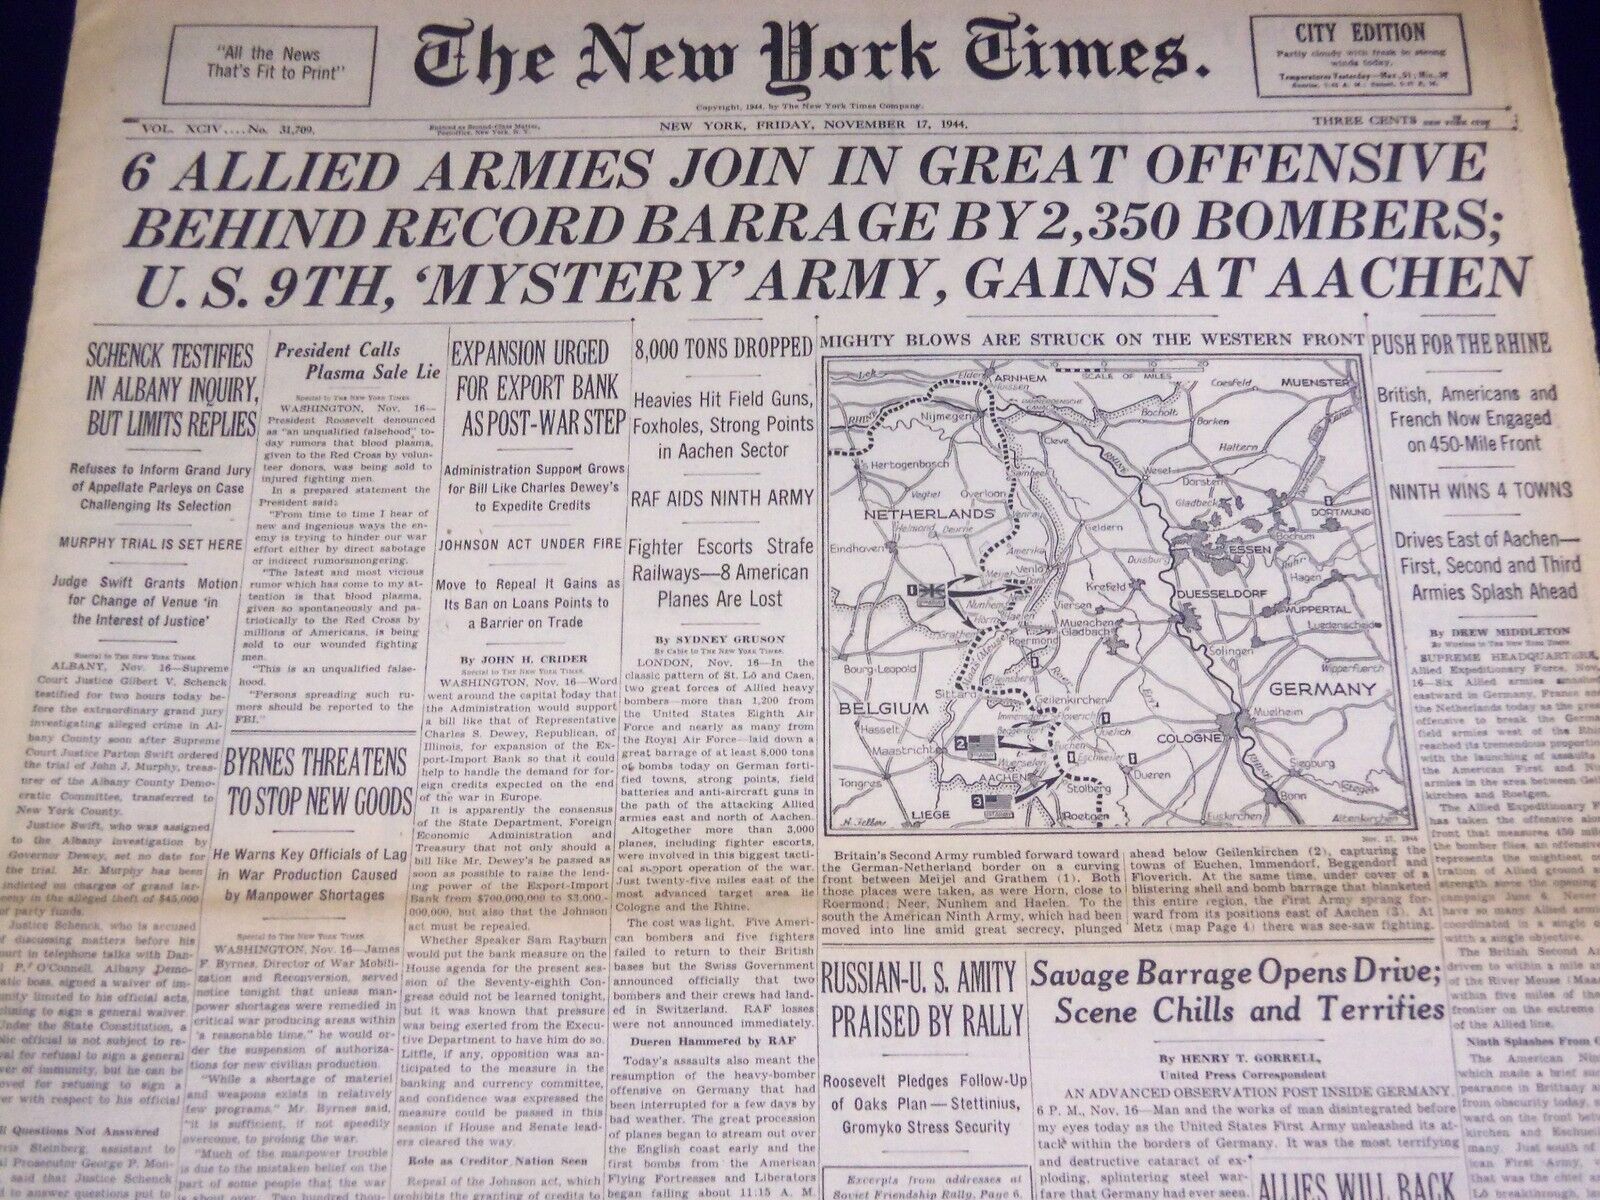 1944 NOV 17 NEW YORK TIMES - ALLIED ARMIES JOIN IN GREAT OFFENSIVE - NT 2603